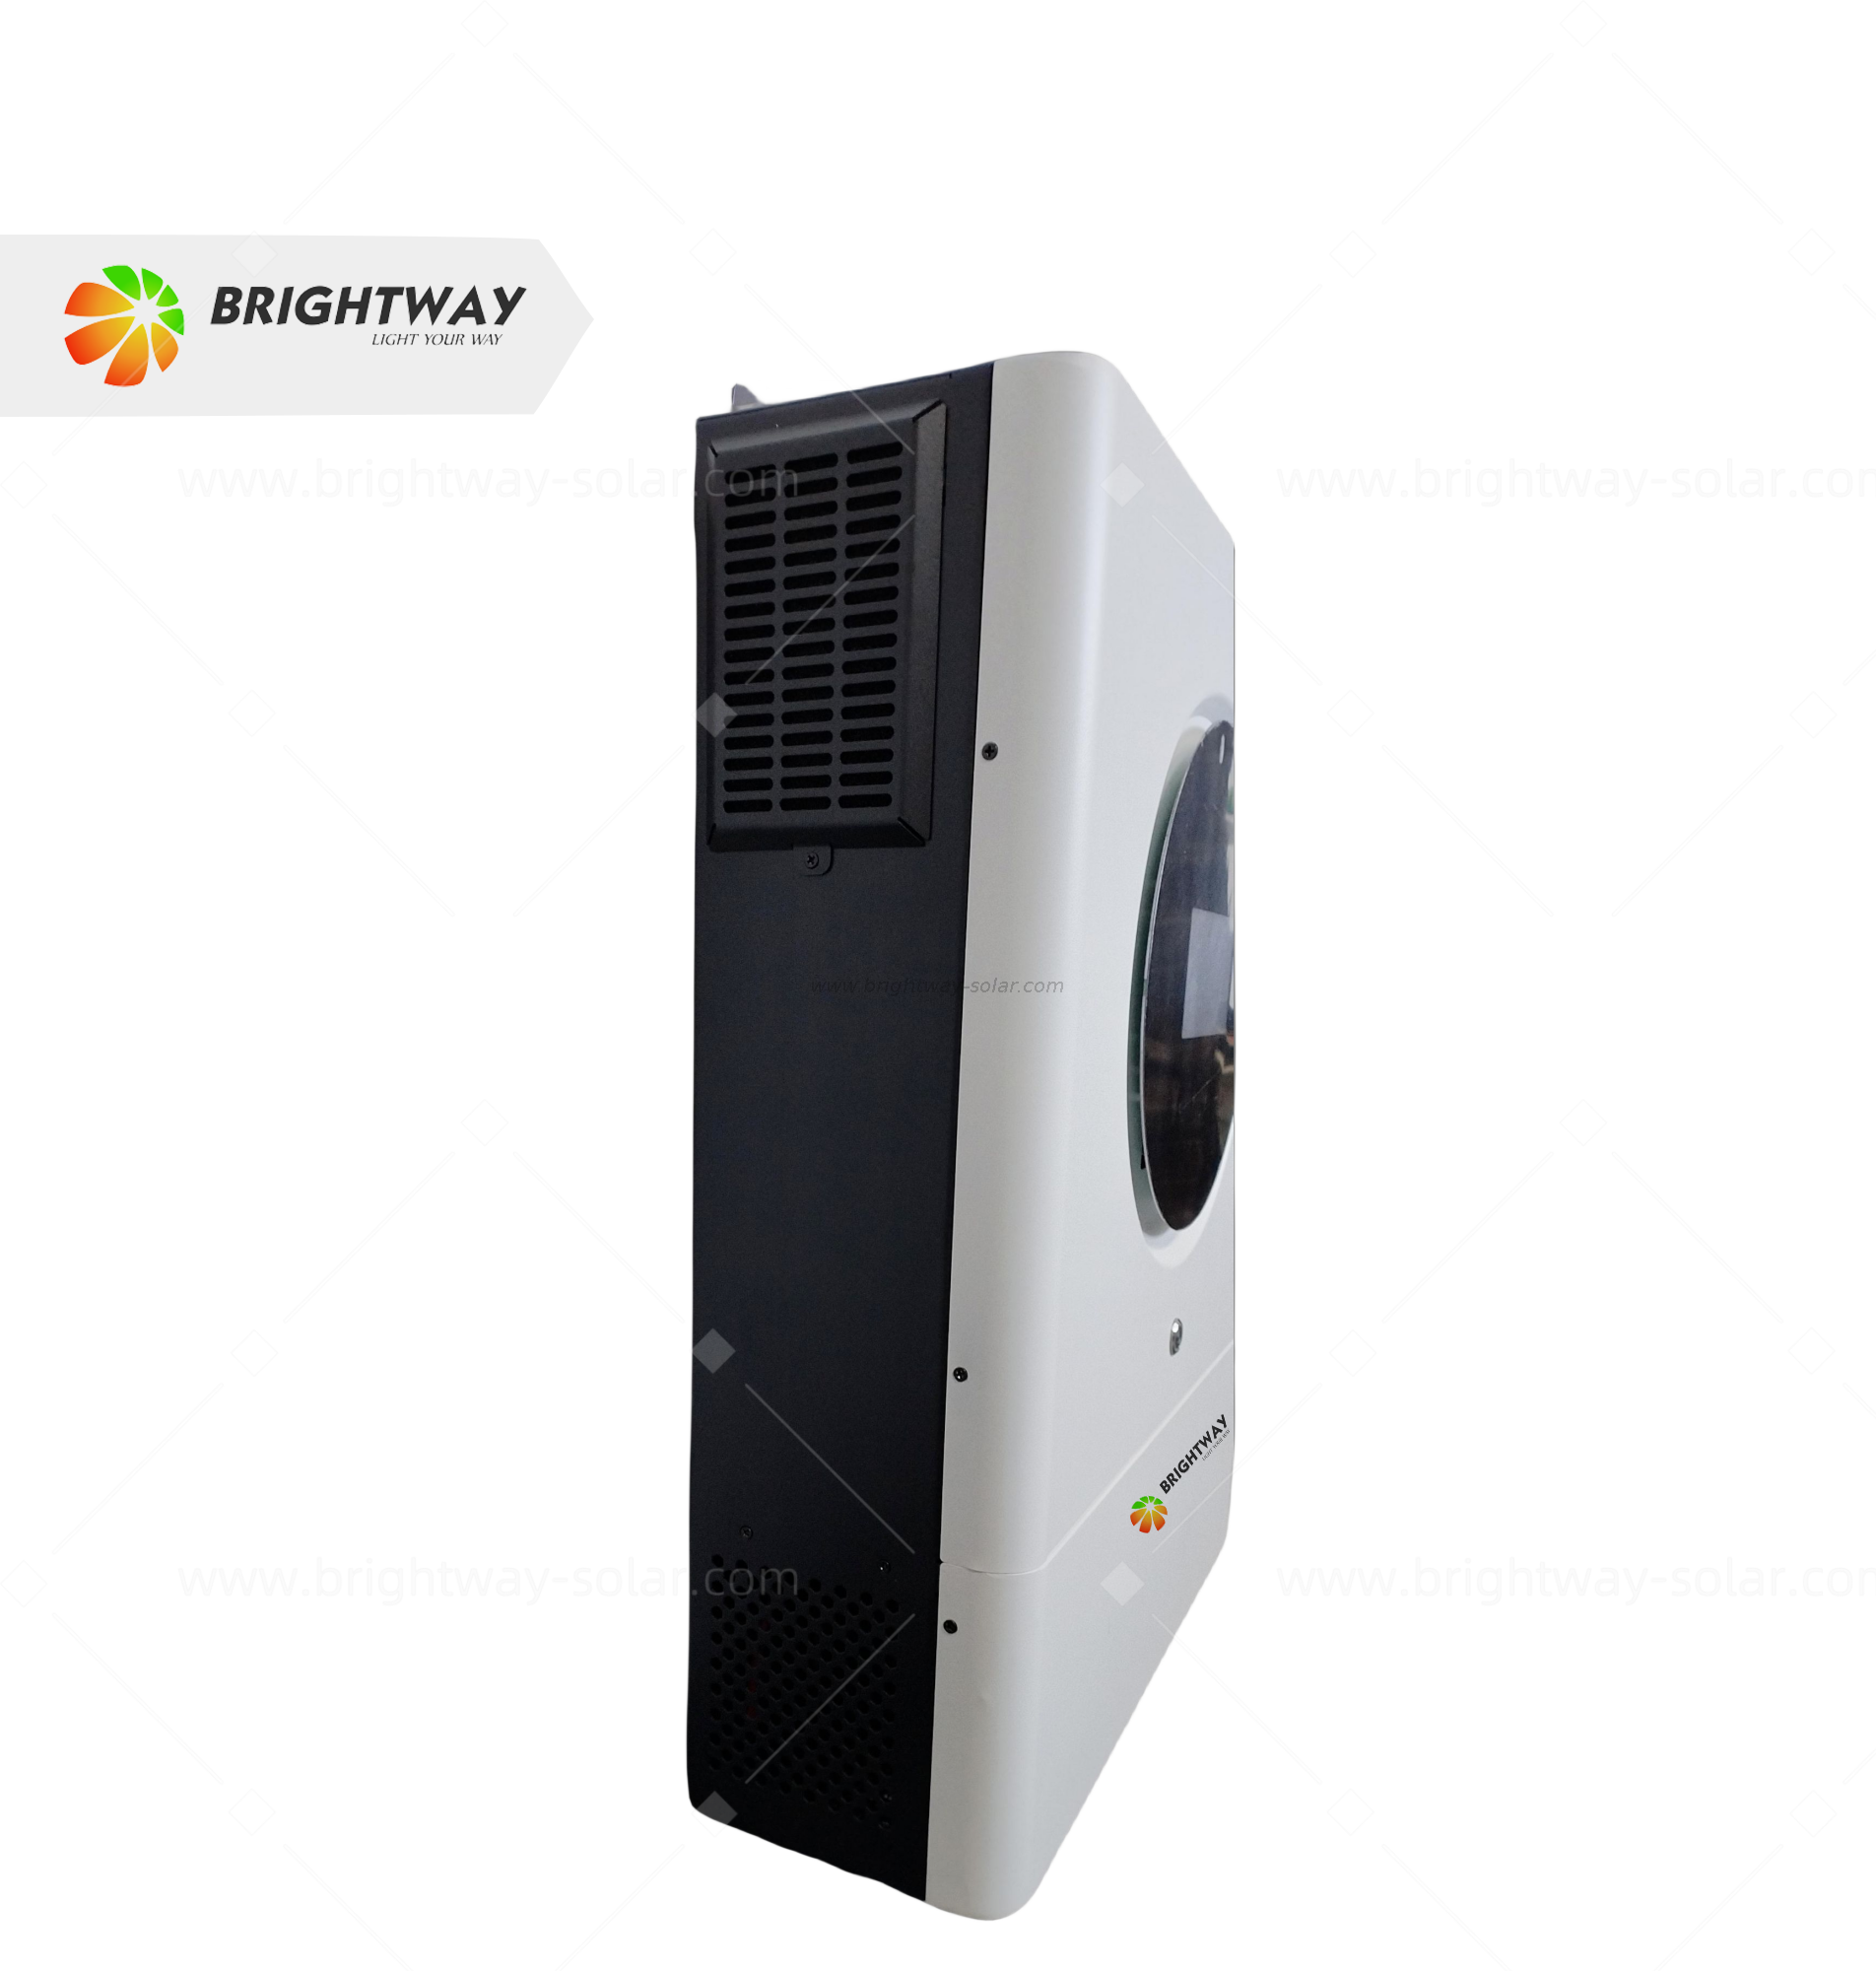 Brightway Single Phase DC/AC Inverter 11kW With LCD Screen for Solar Power System Home